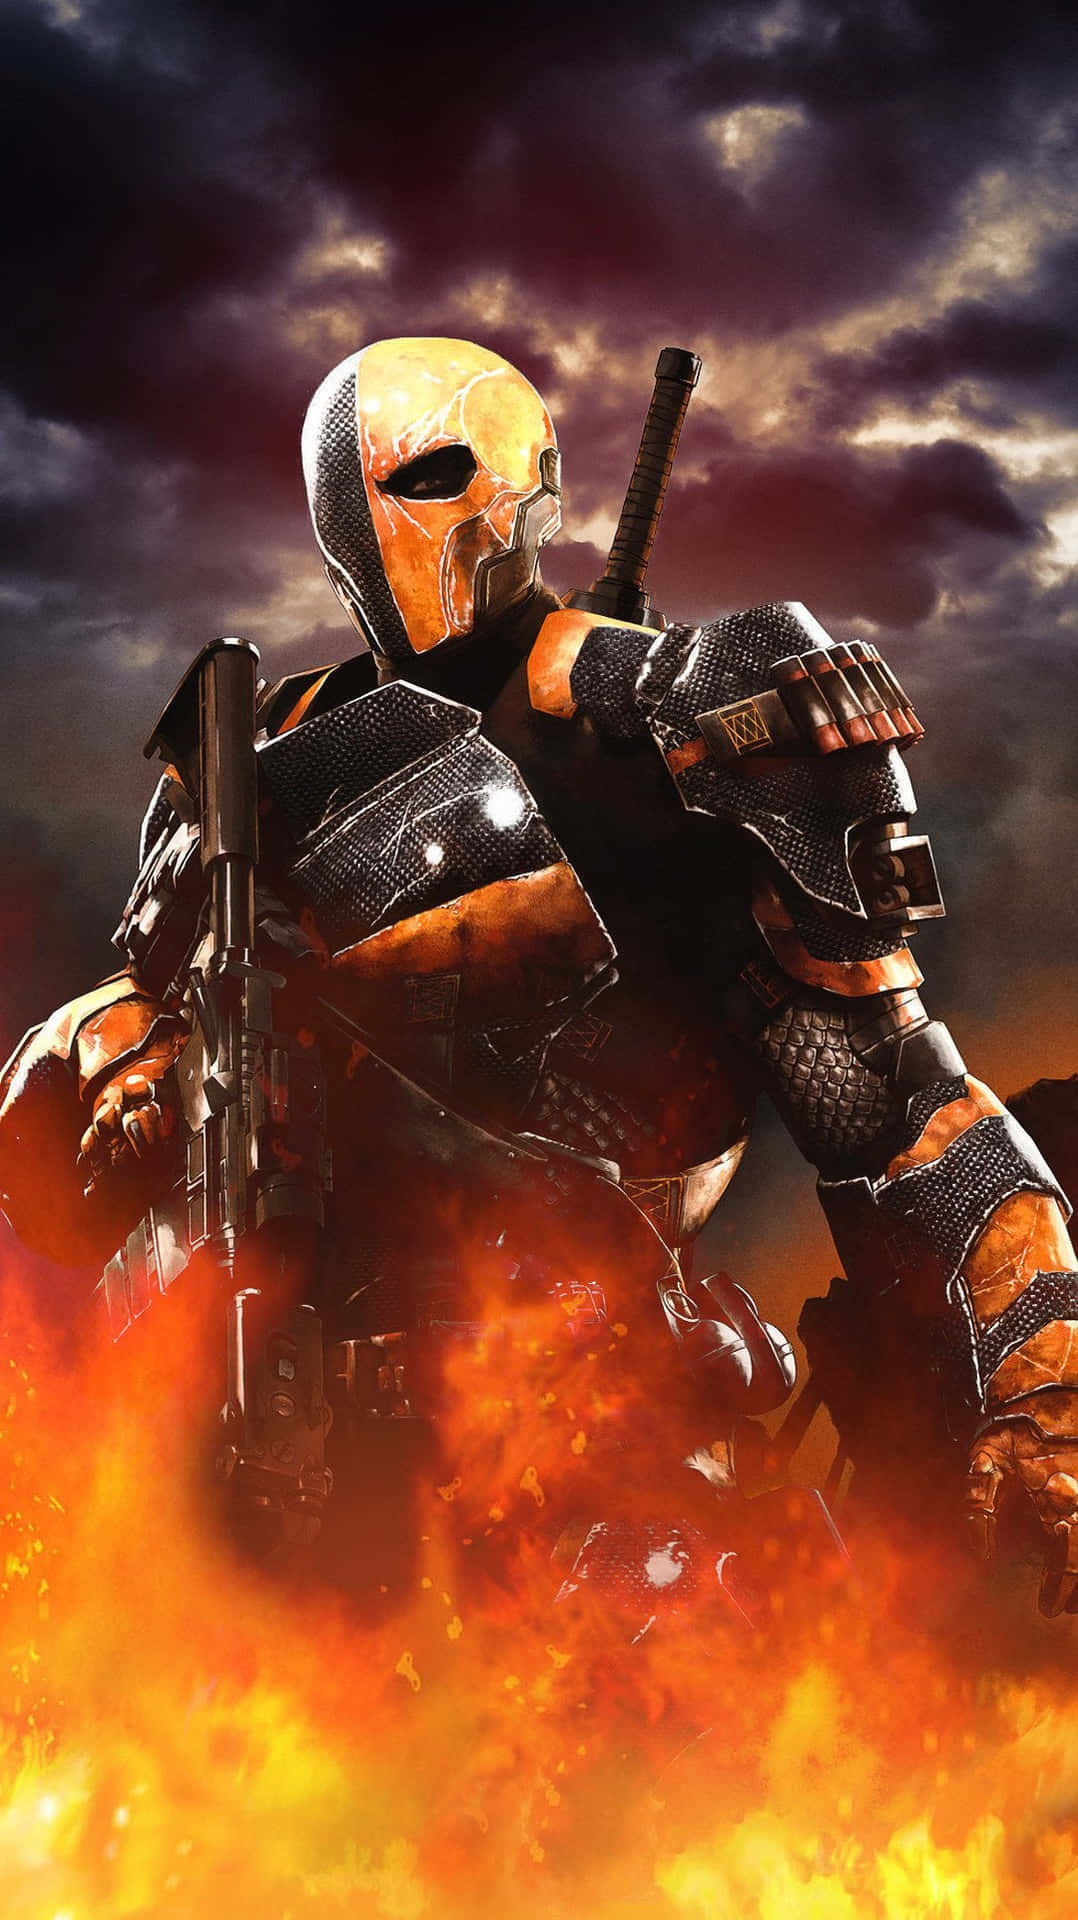 "Deathstroke, the masterful assassin"